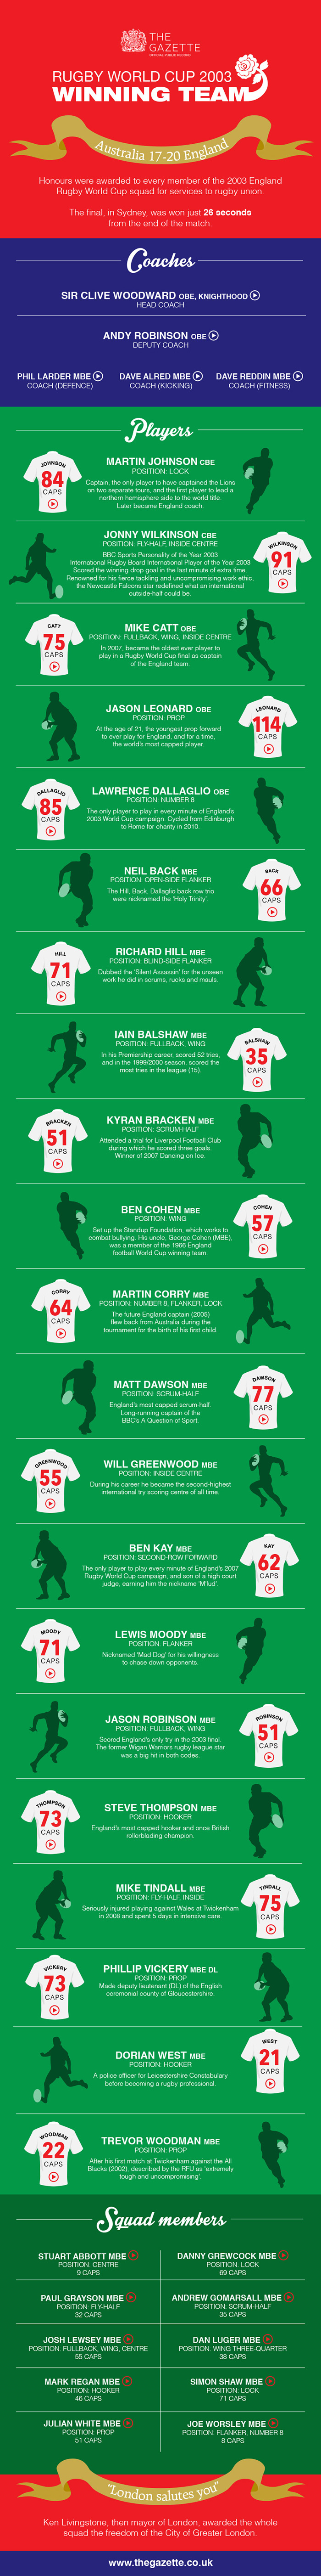 Rugby World Cup: infographic